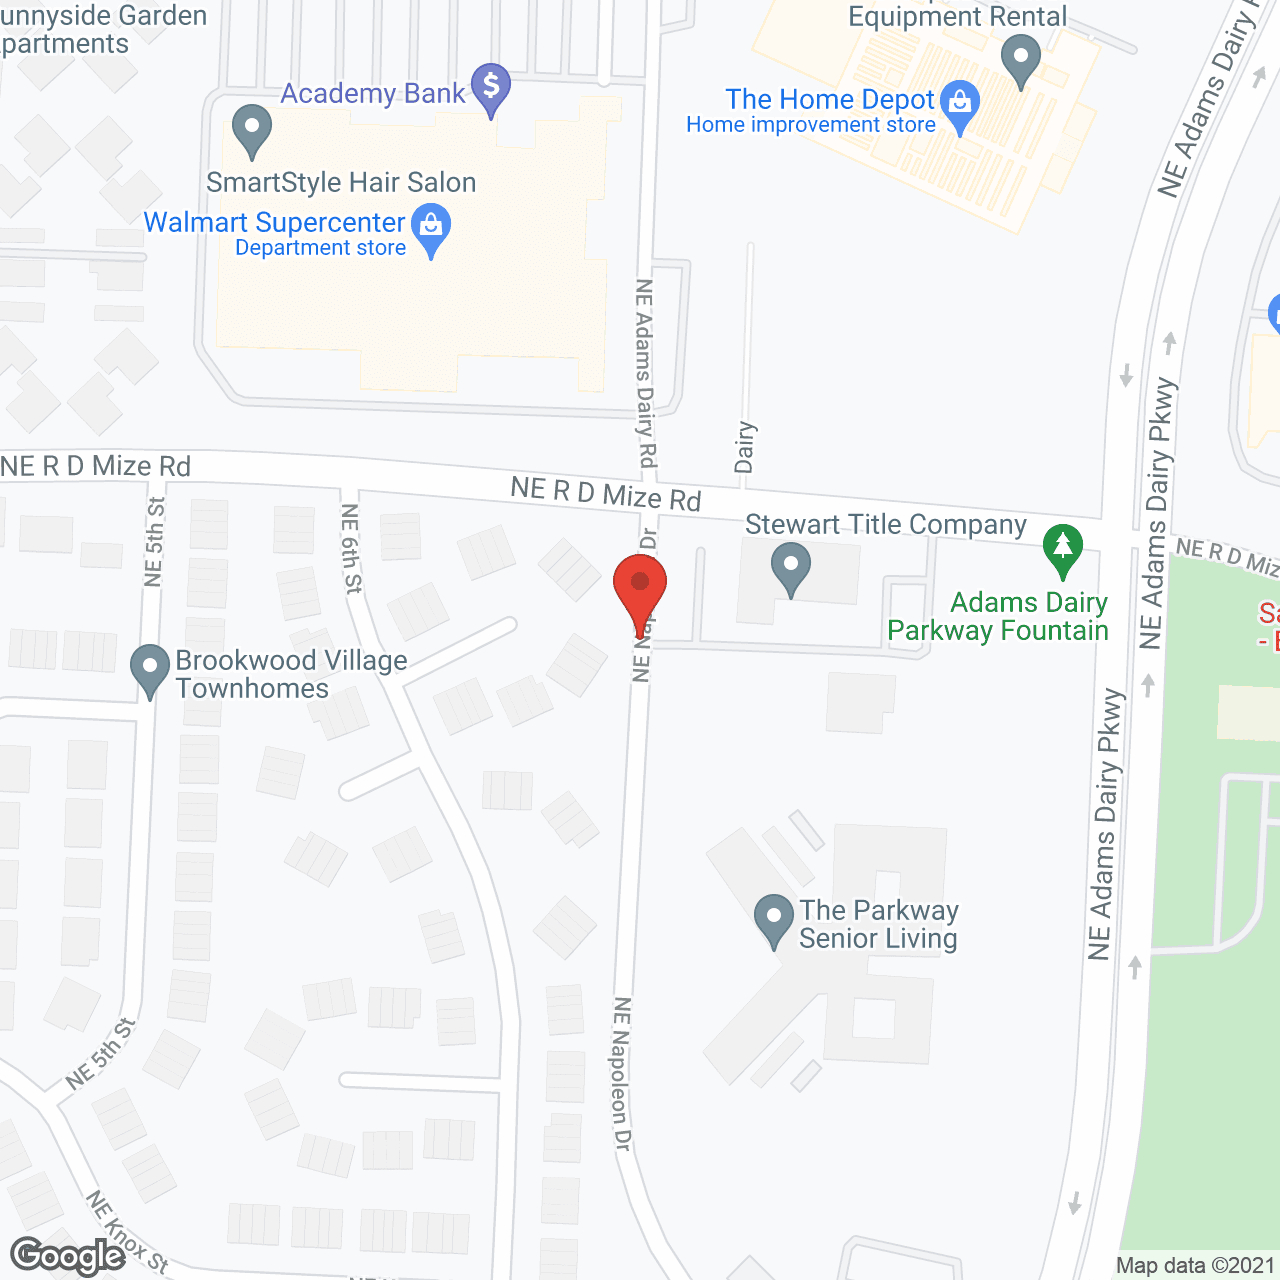 The Parkway Senior Living in google map